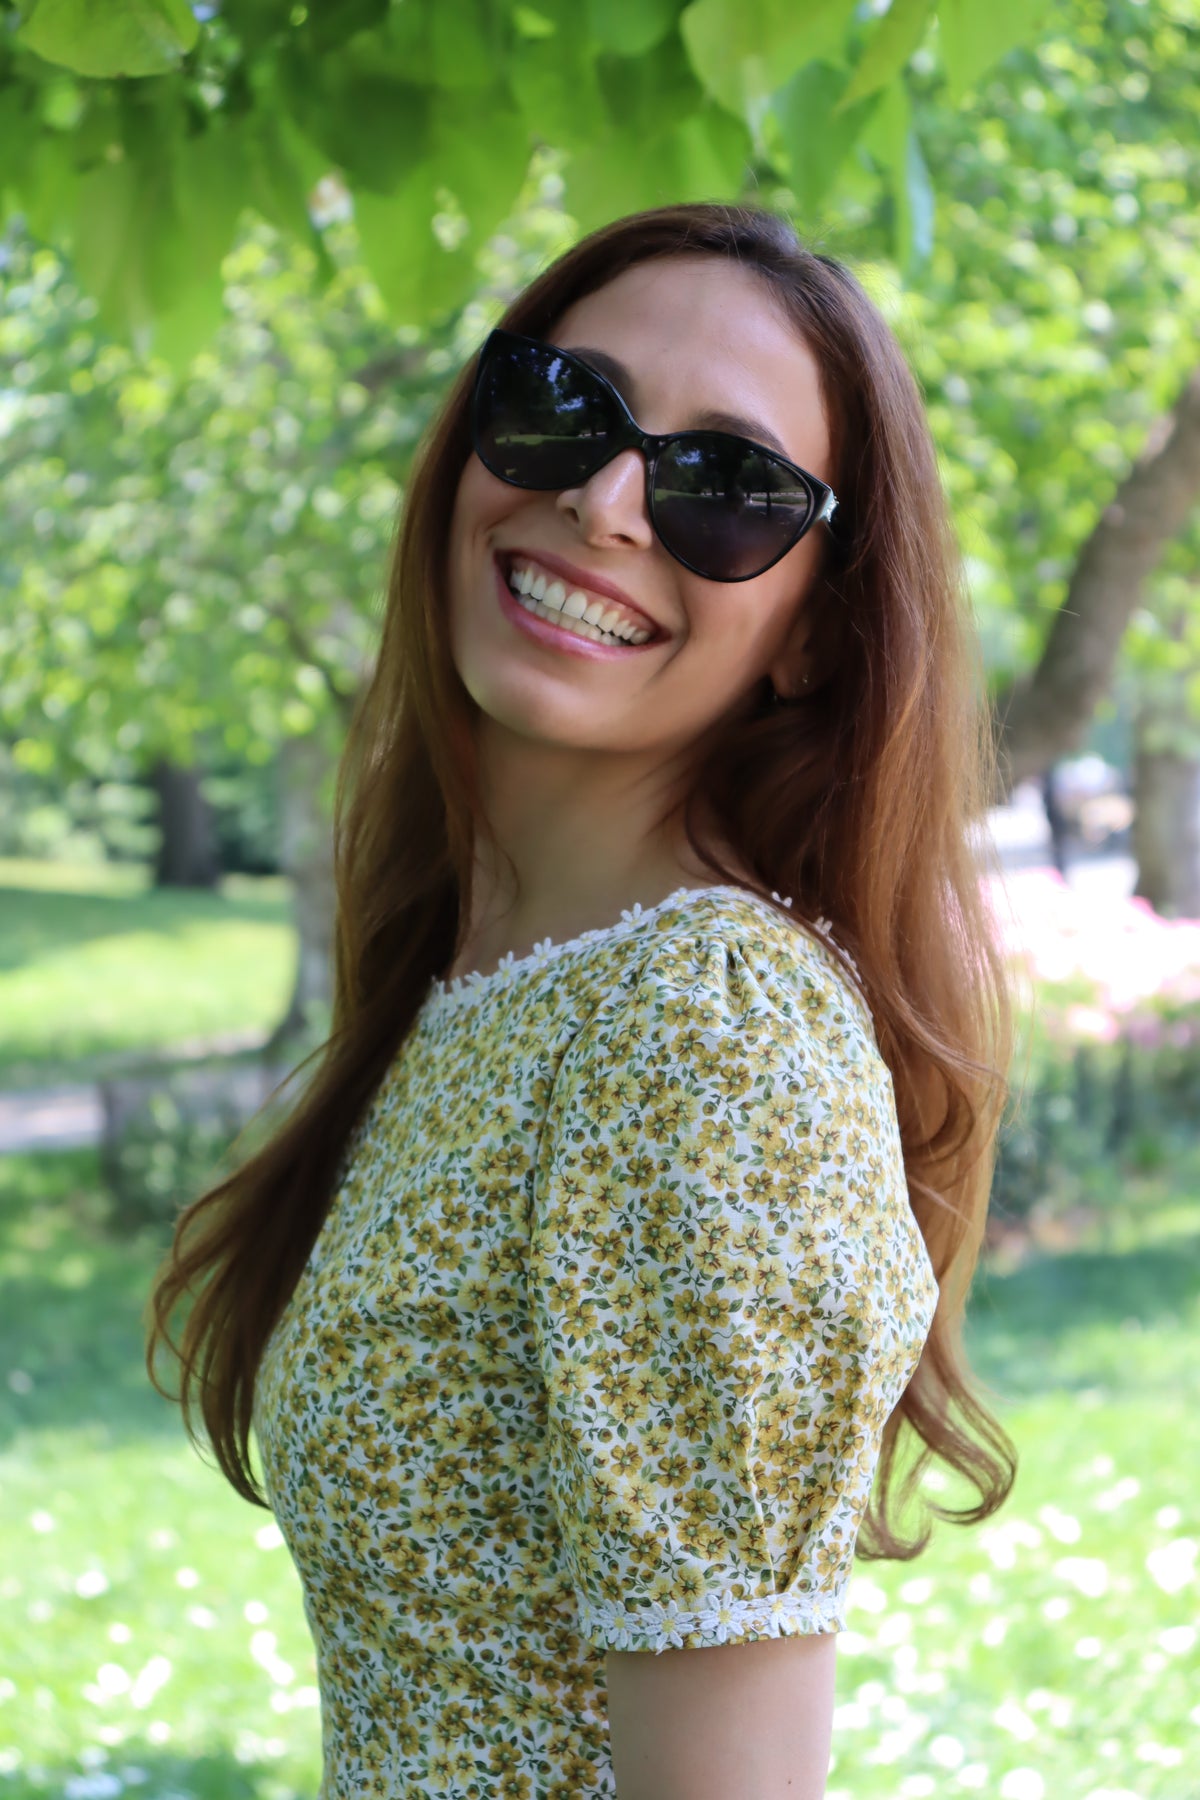 Photo of a model showing the detail of the sleeve of a short yellow floral dress with short sleeves and white daisy trim .